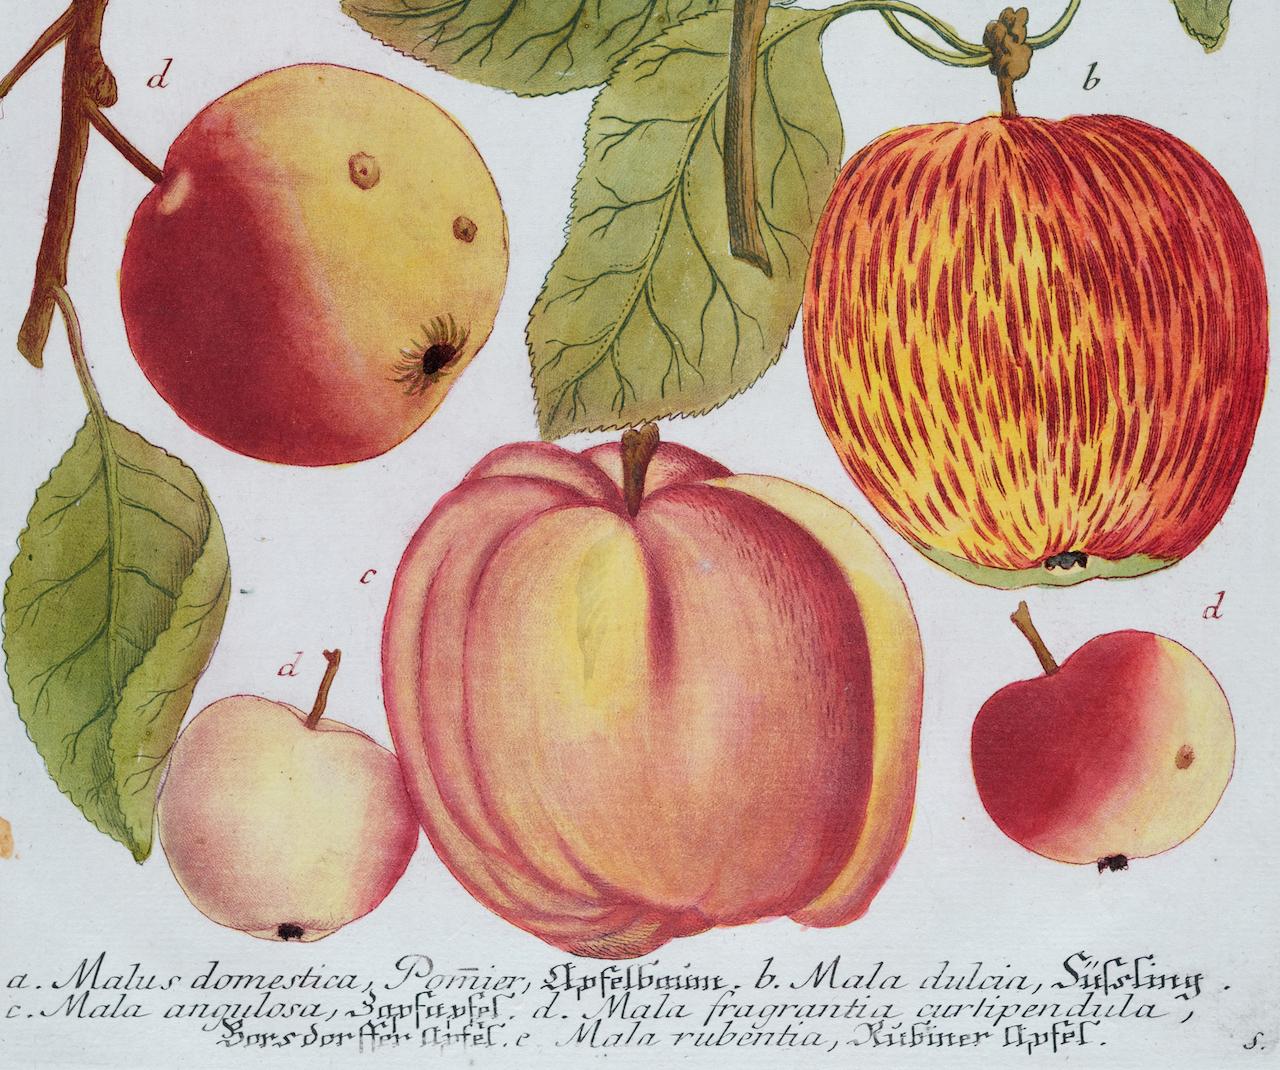 This striking hand-colored botanical mezzotint and line engraving is entitled Malus domestica, Pomier, Apfelbaunt (Apple)